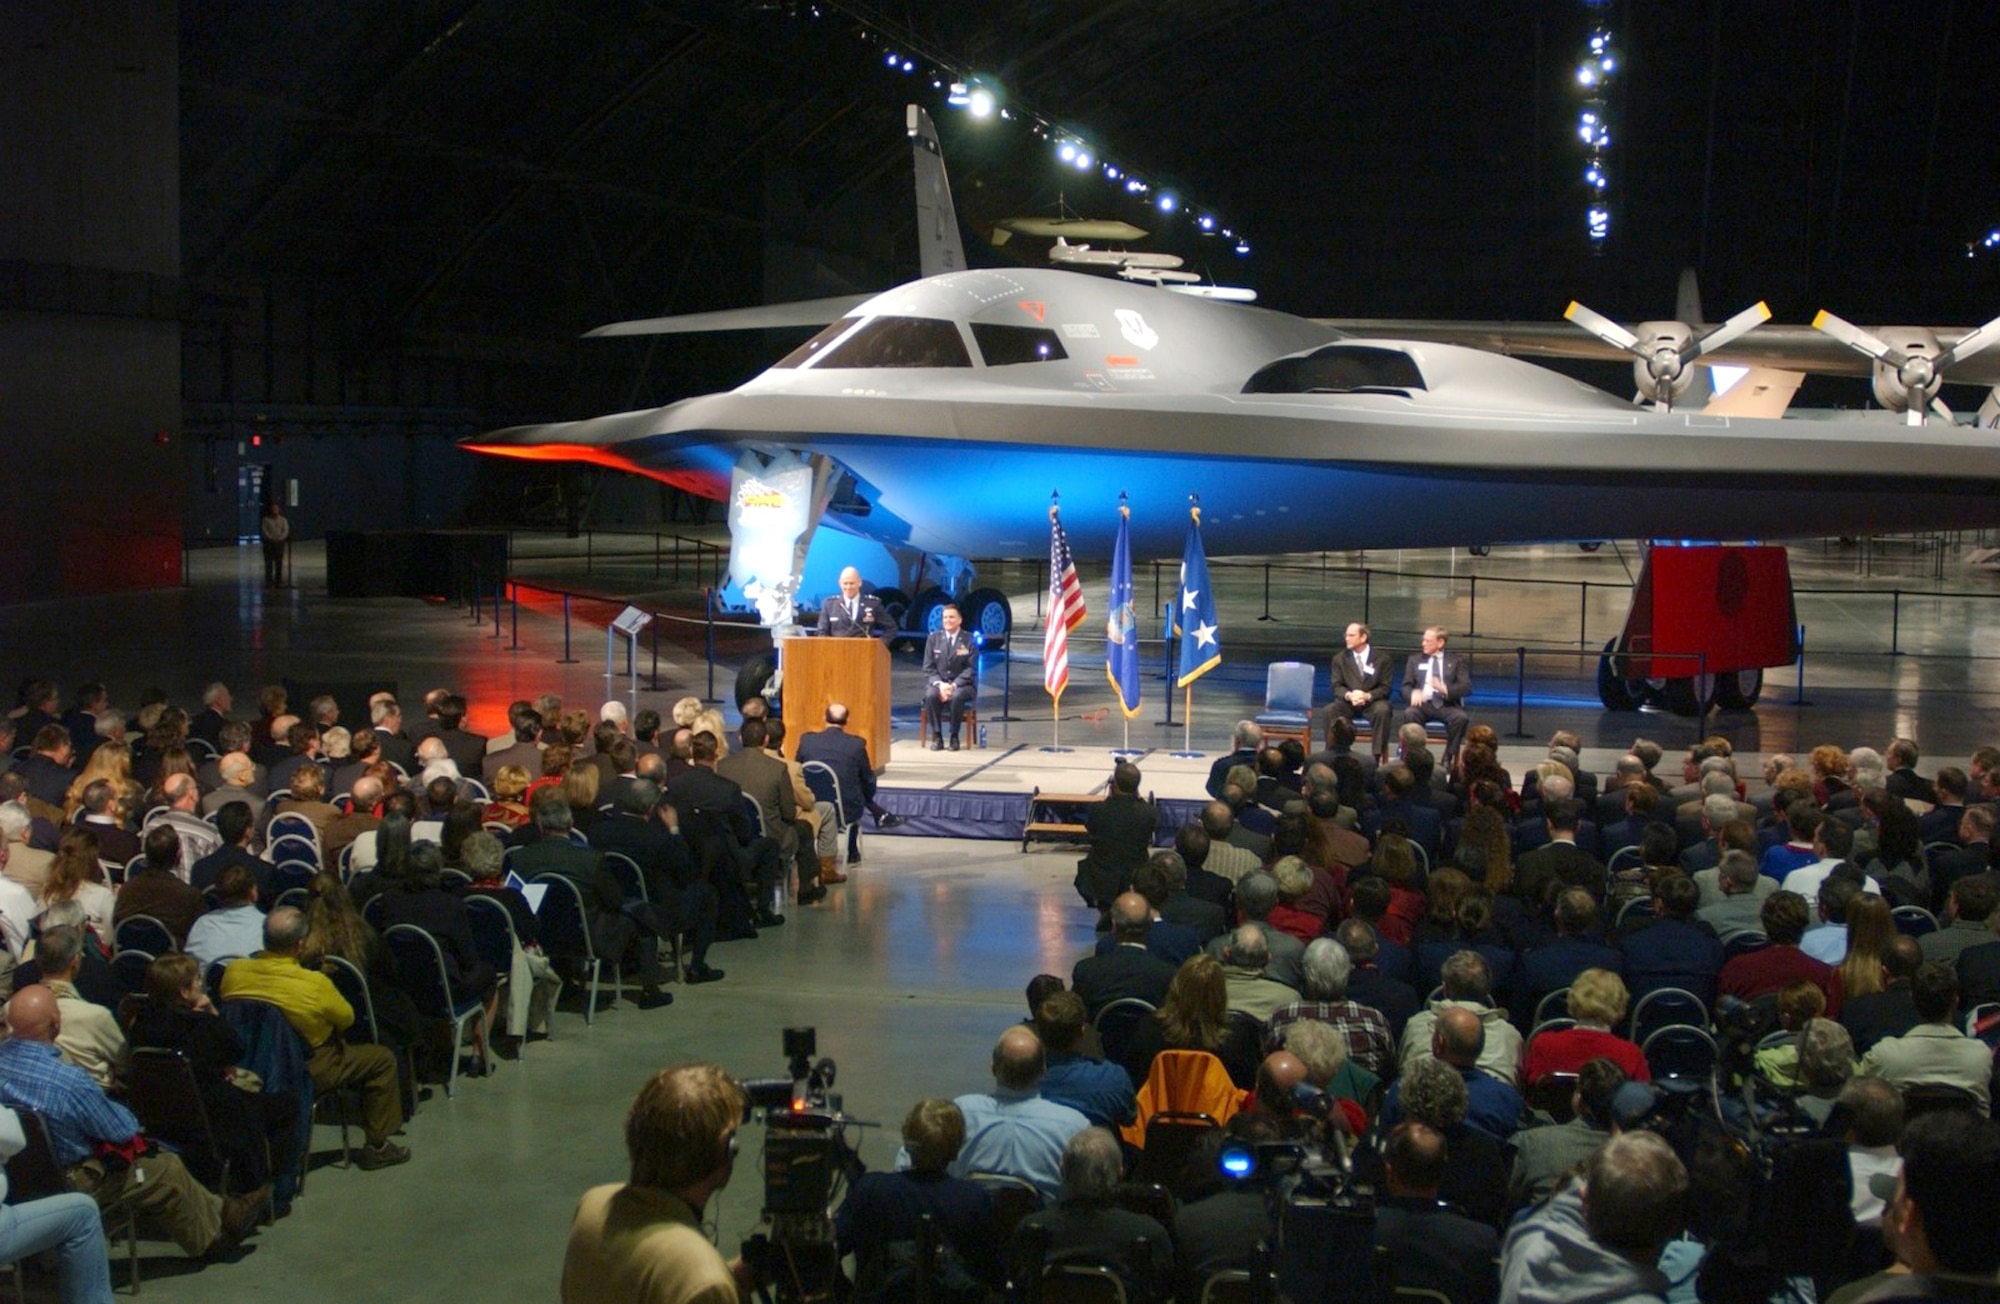 WRIGHT-PATTERSON AIR FORCE BASE, Ohio -- U.S. Air Force Museum officials formally inducted a B-2 Spirit stealth bomber into the institution's aircraft collection Dec. 16.  The Air Force's national museum is the first place to permanently exhibit the stealth bomber to the public.  (Courtesy photo)